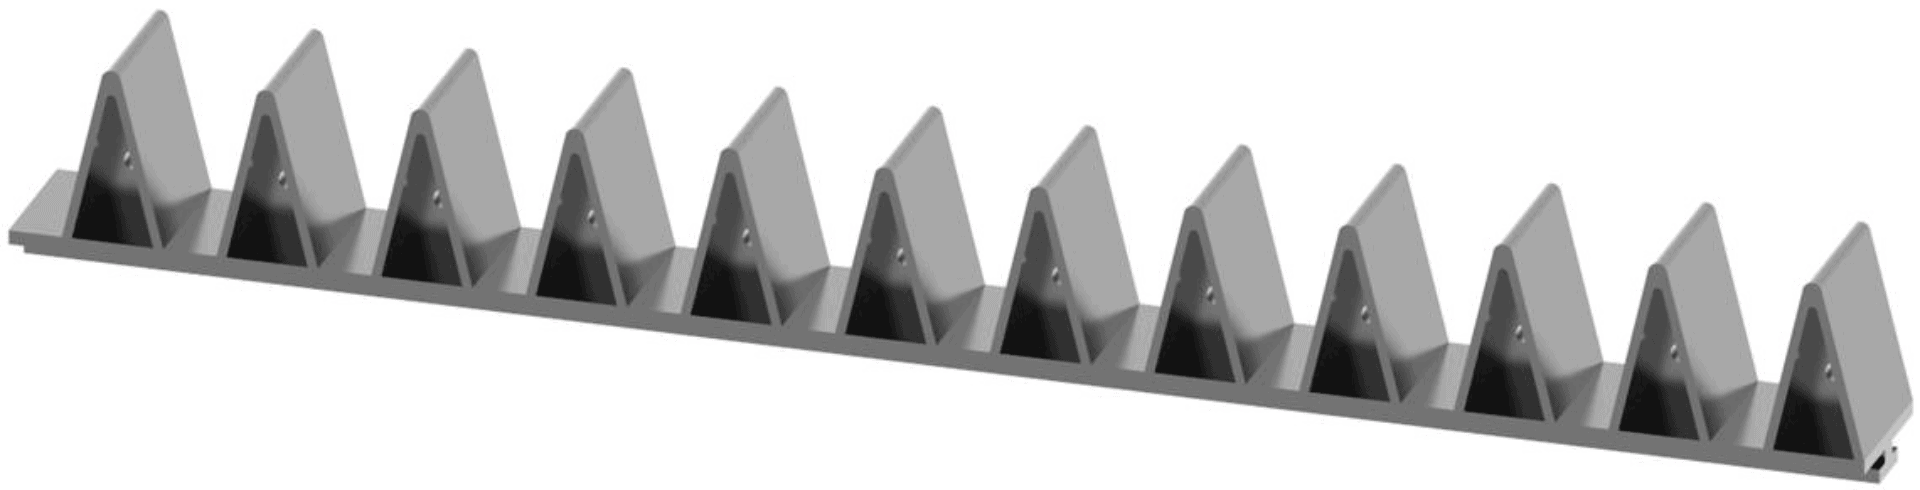 Standard Injection Molded Dunnage